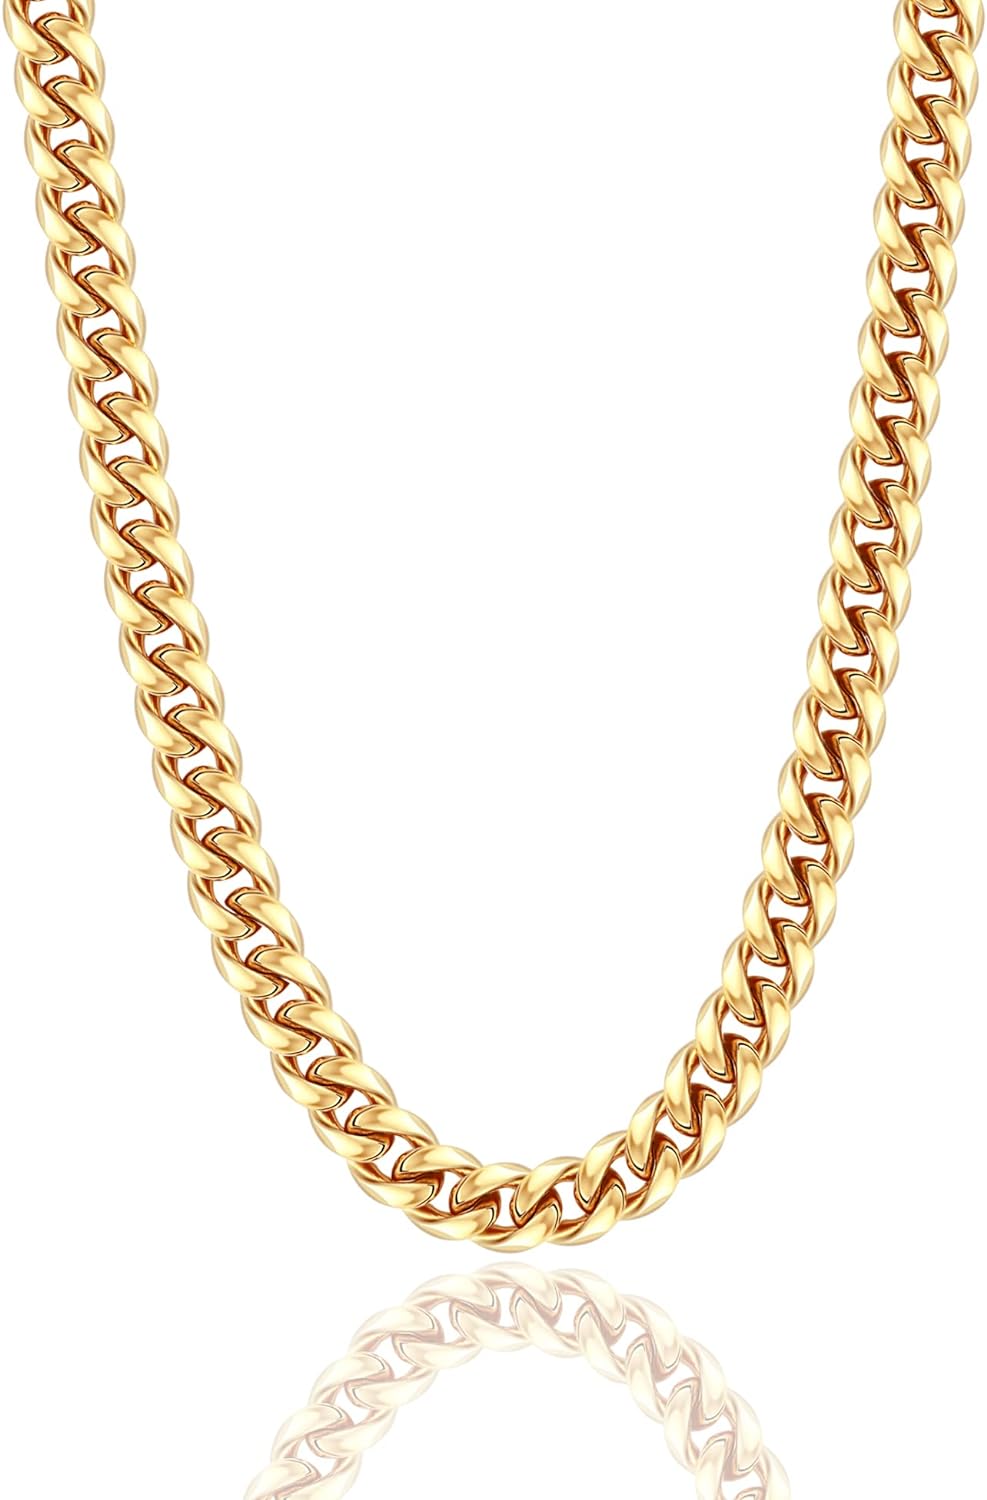 18k Real Gold Plated Curb Cuban Chain Necklace Stainless Steel Link Necklace for Men Women 6mm to 11mm 16 Inches to 36 Inches